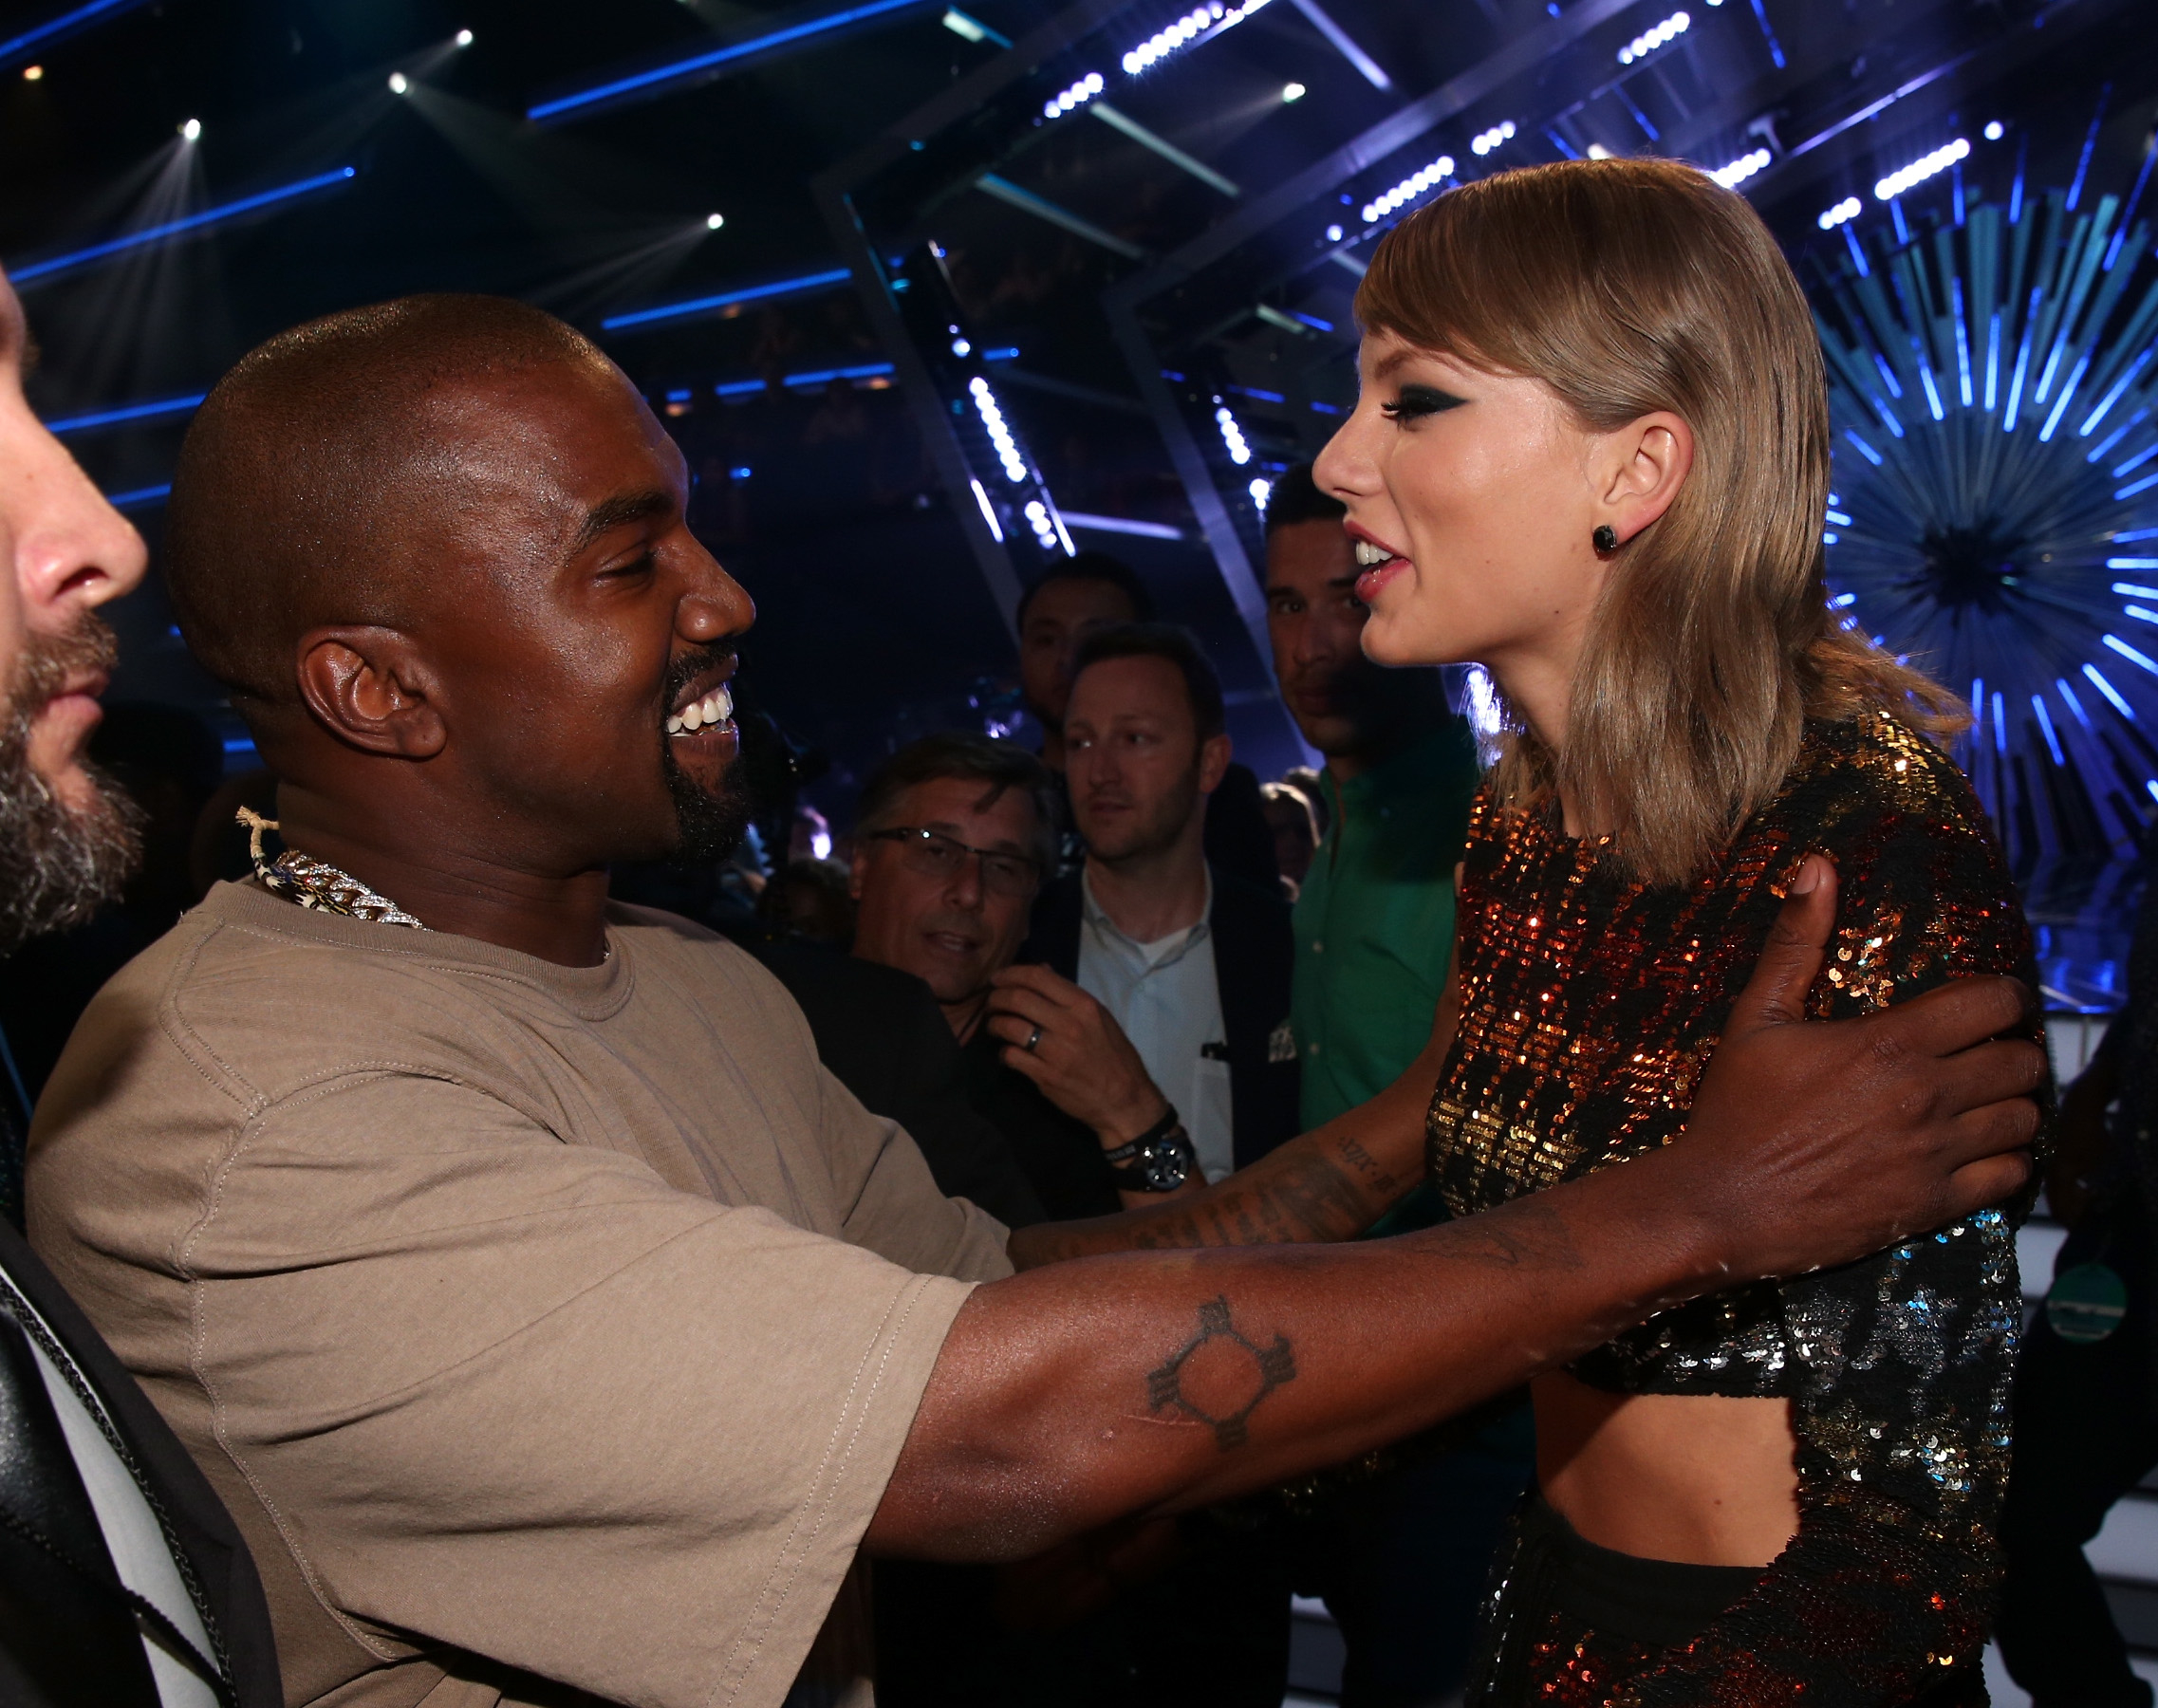 kanye grabbing taylor&#x27;s shoulders as the two talk at a show